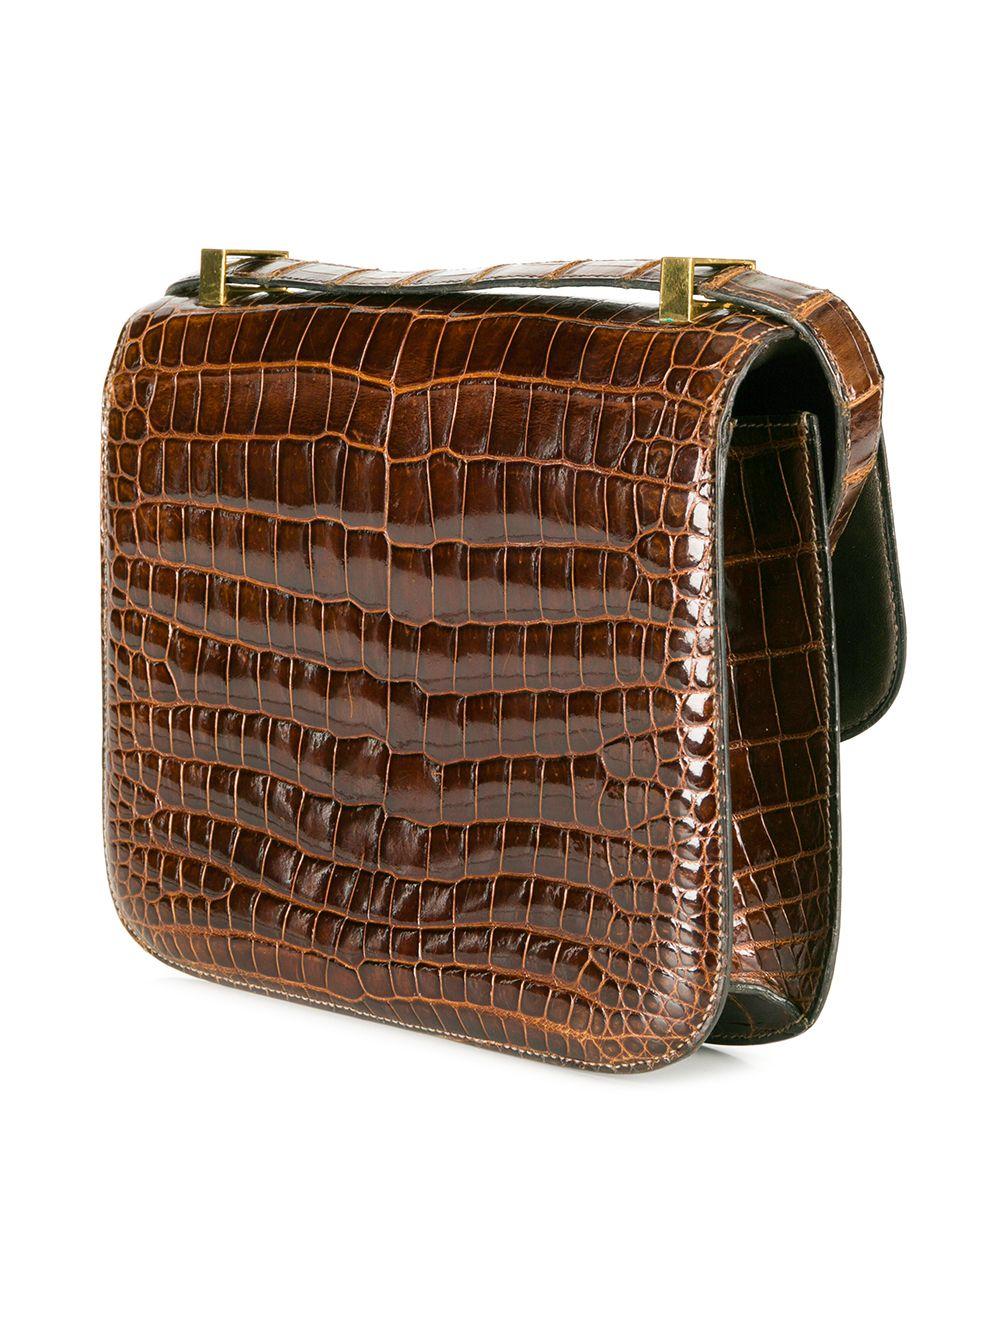 This extremely rare, vintage crocodile Hermès Constance bag comes in a unique and extremely sought after Miel Brown colour. The interior features one spacious interior compartment, containing one wide open slip pocket and one wide pocket with a